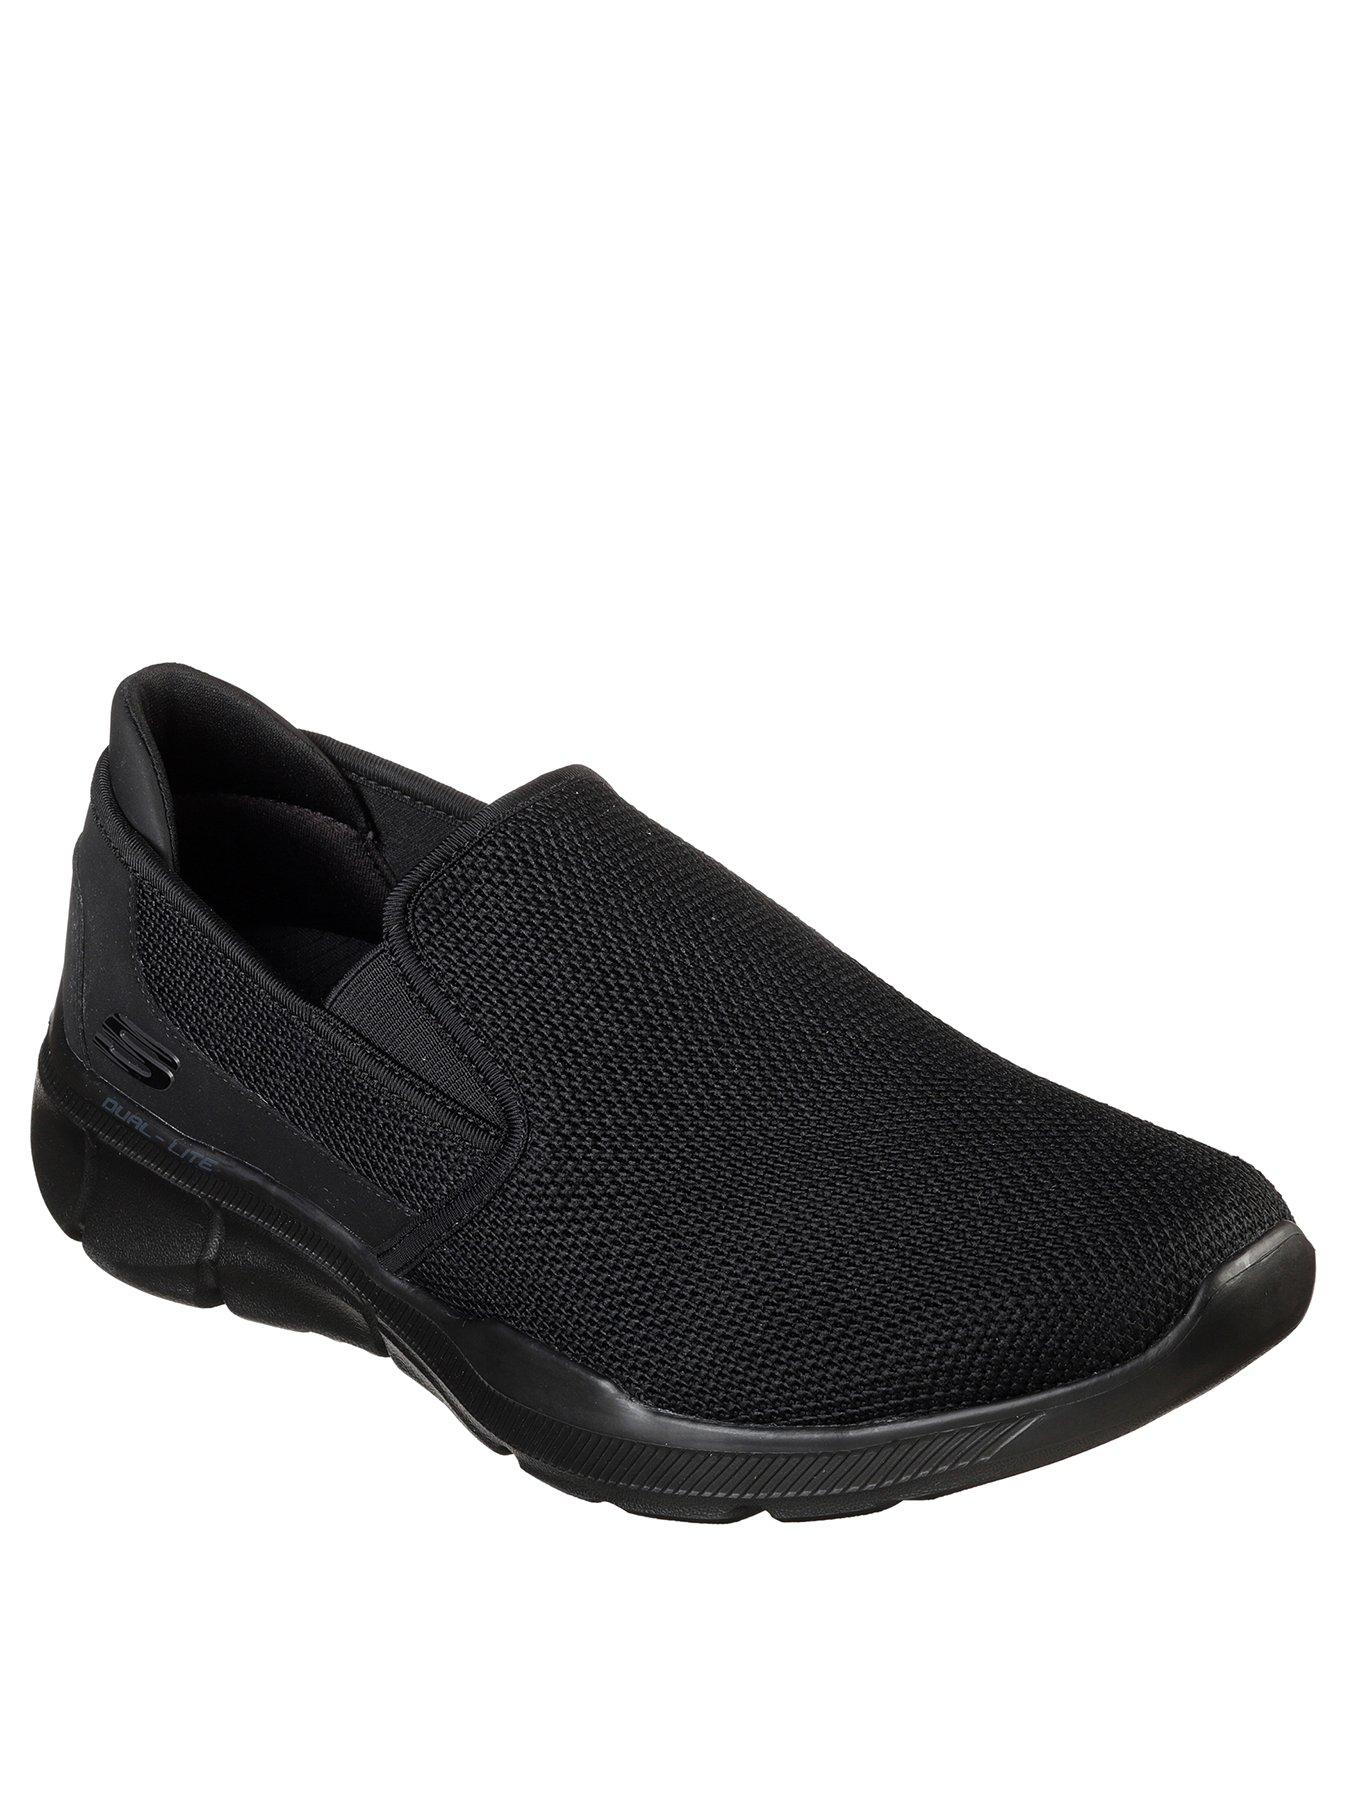 skechers relaxed fit extreme cushion boots